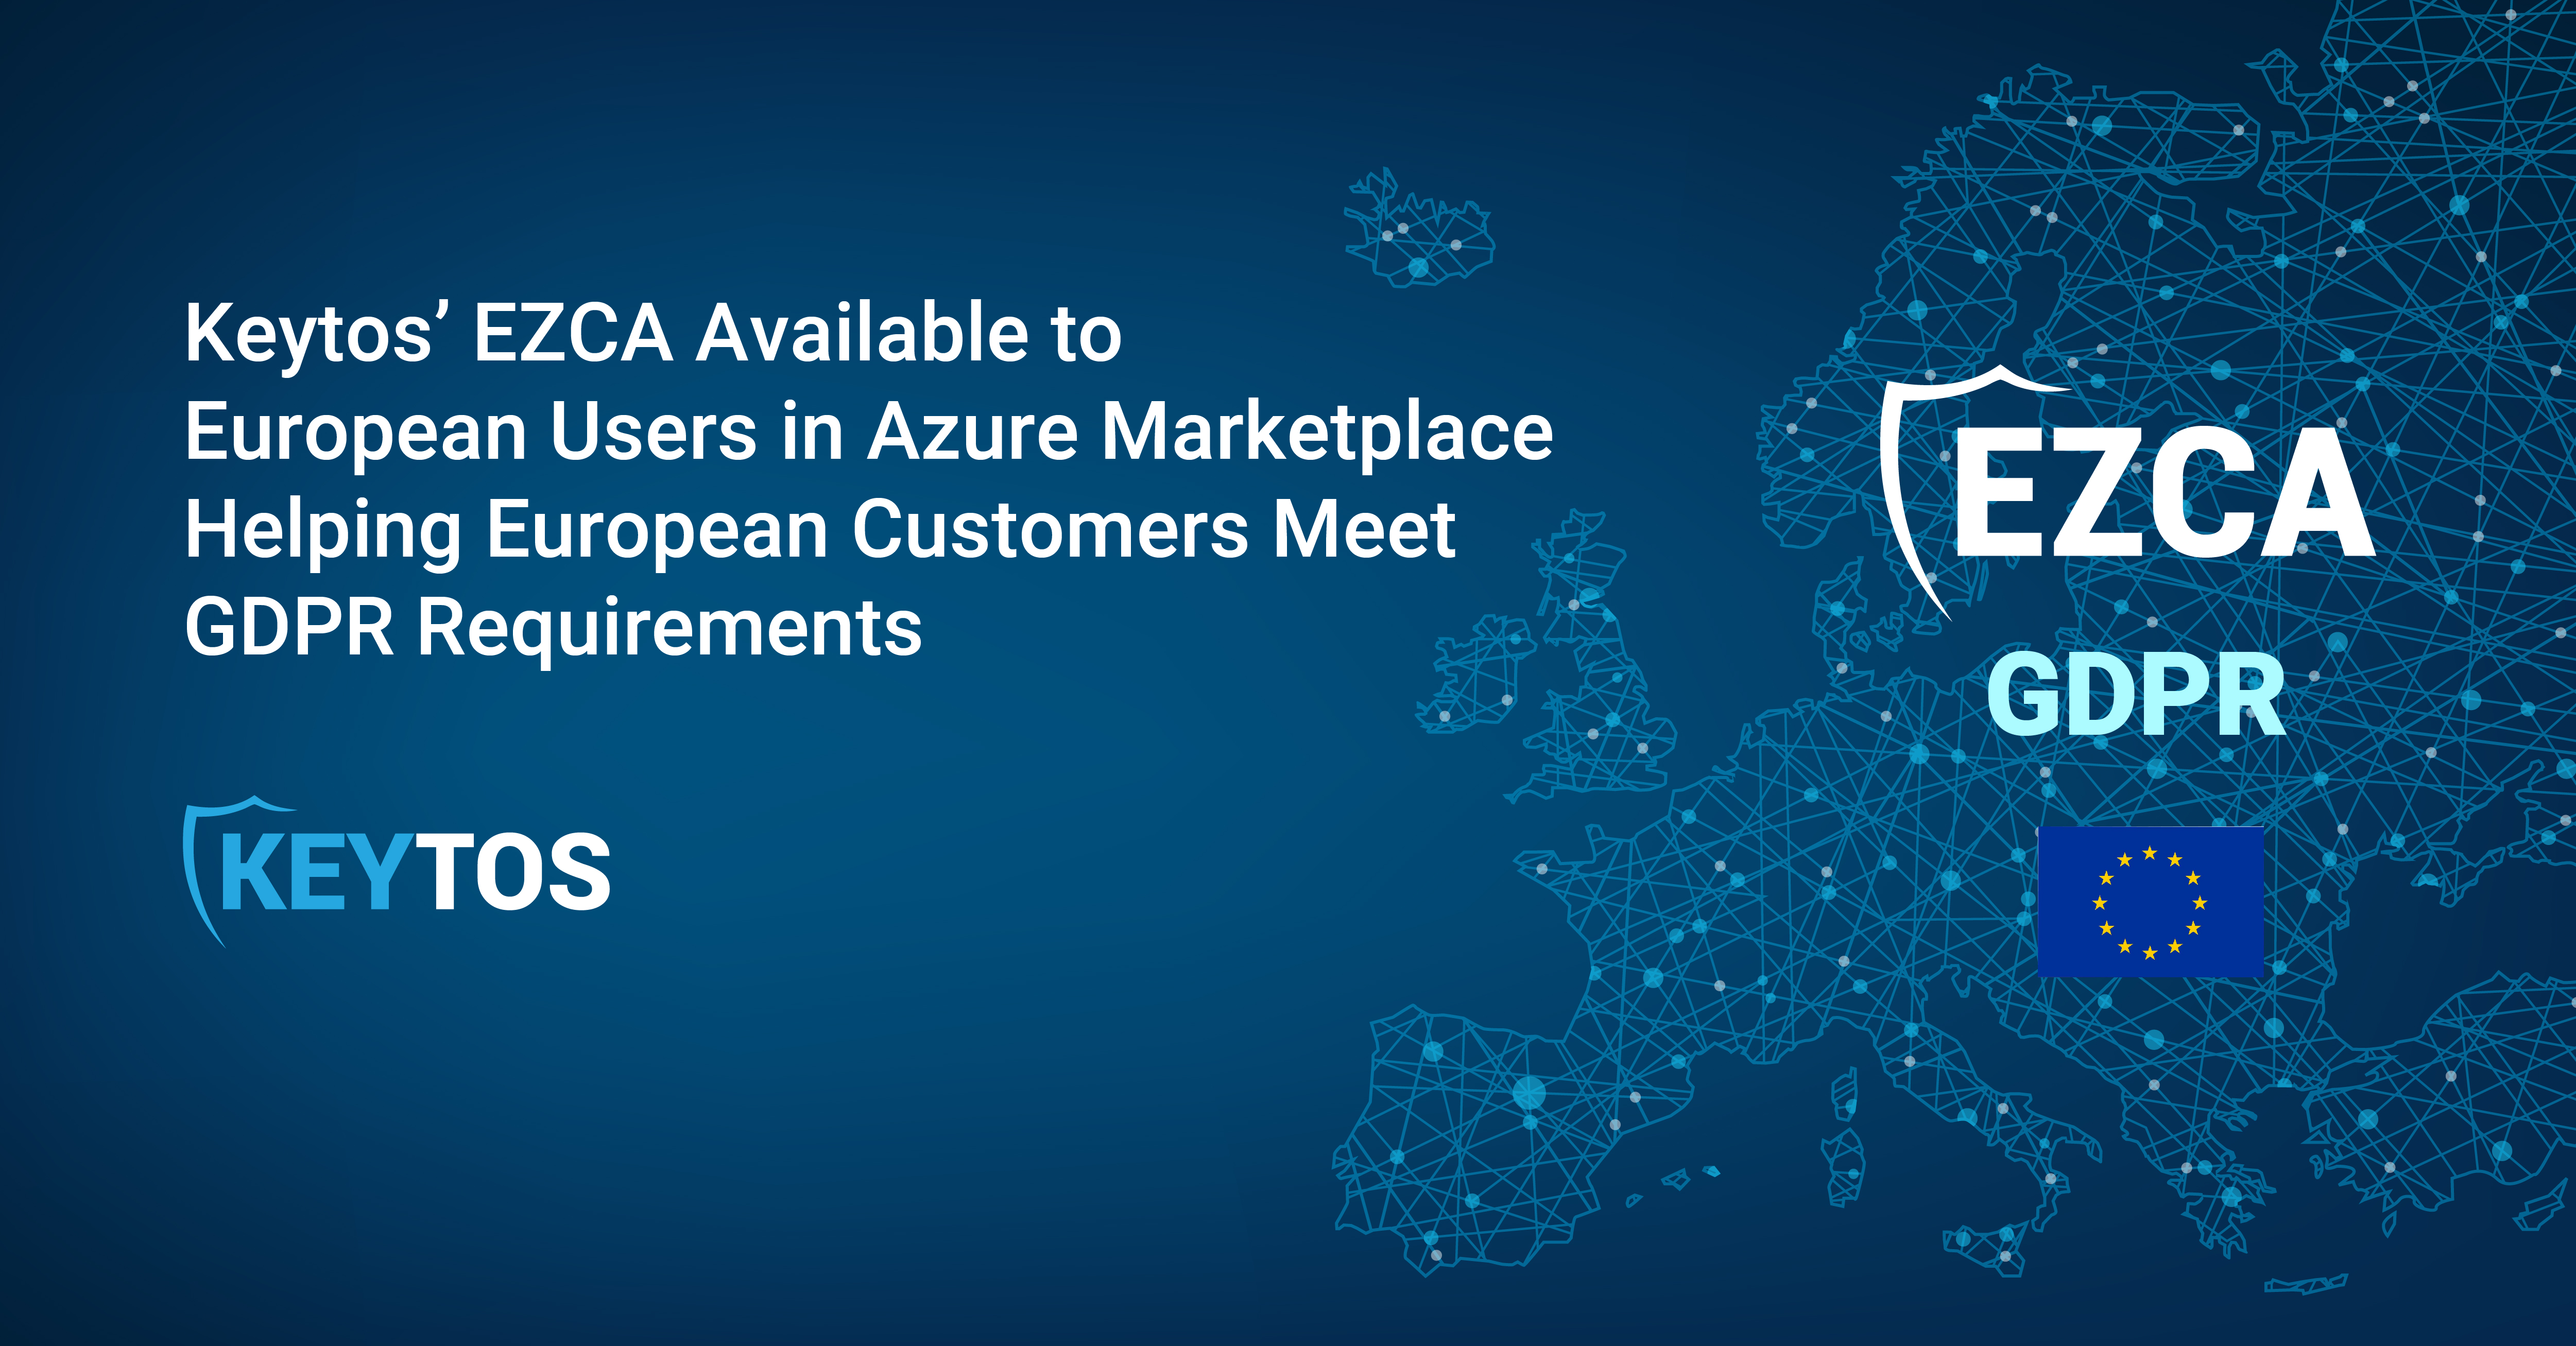 Keytos’ EZCA Available to European Users in Azure Marketplace, Helping European Customers Meet GDPR Requirements